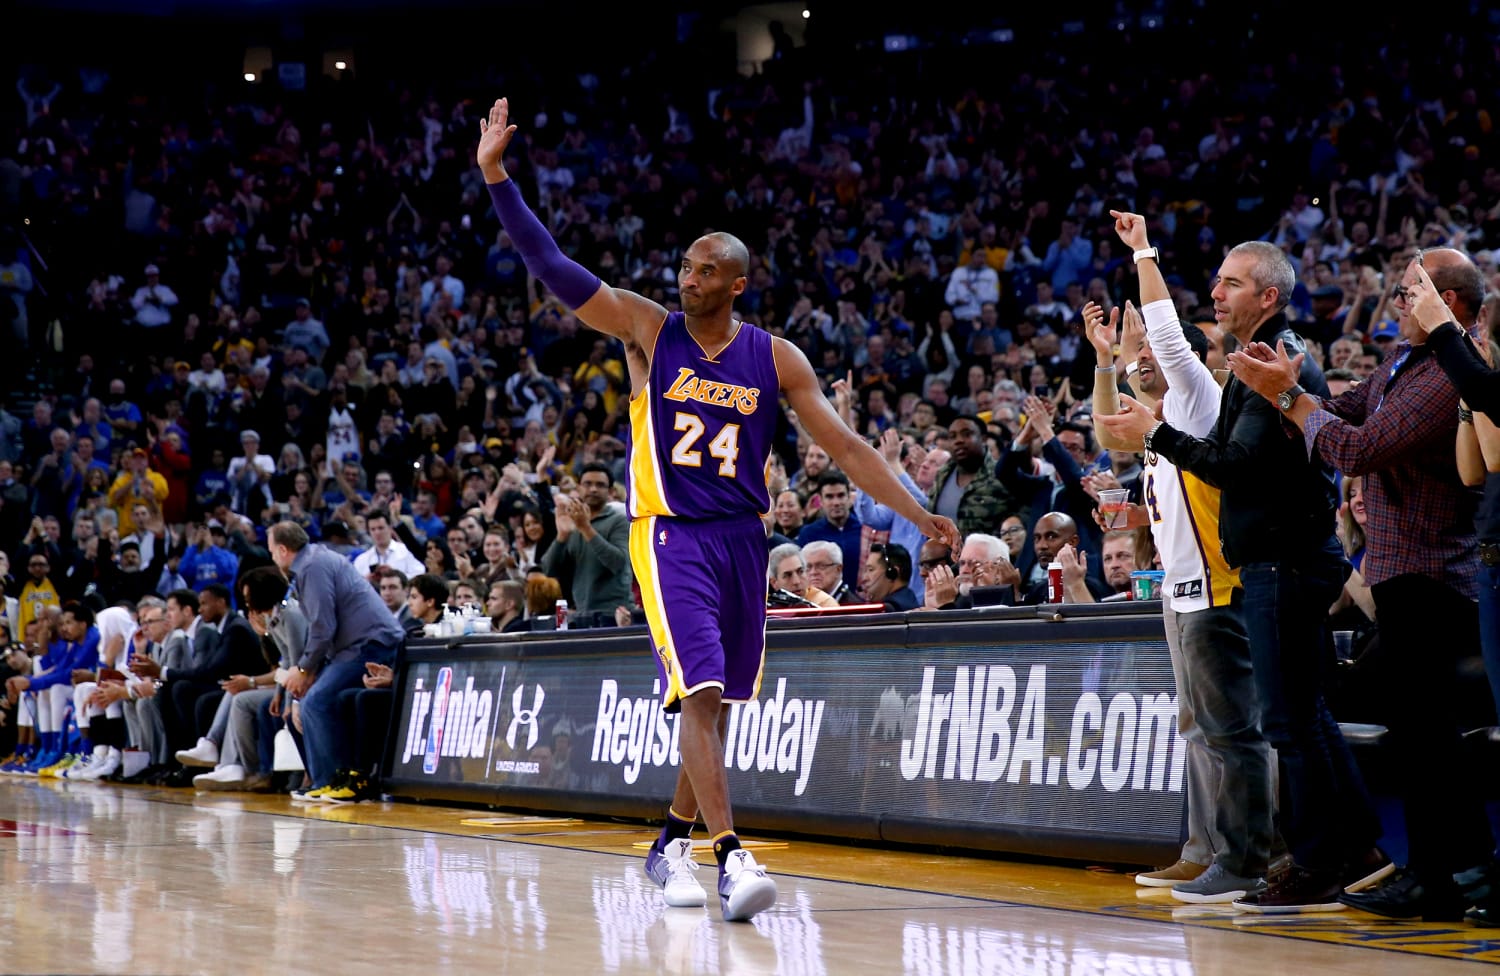 Kobe Bryant 81-point game interview with Patrick O'Neal of Fox Sports